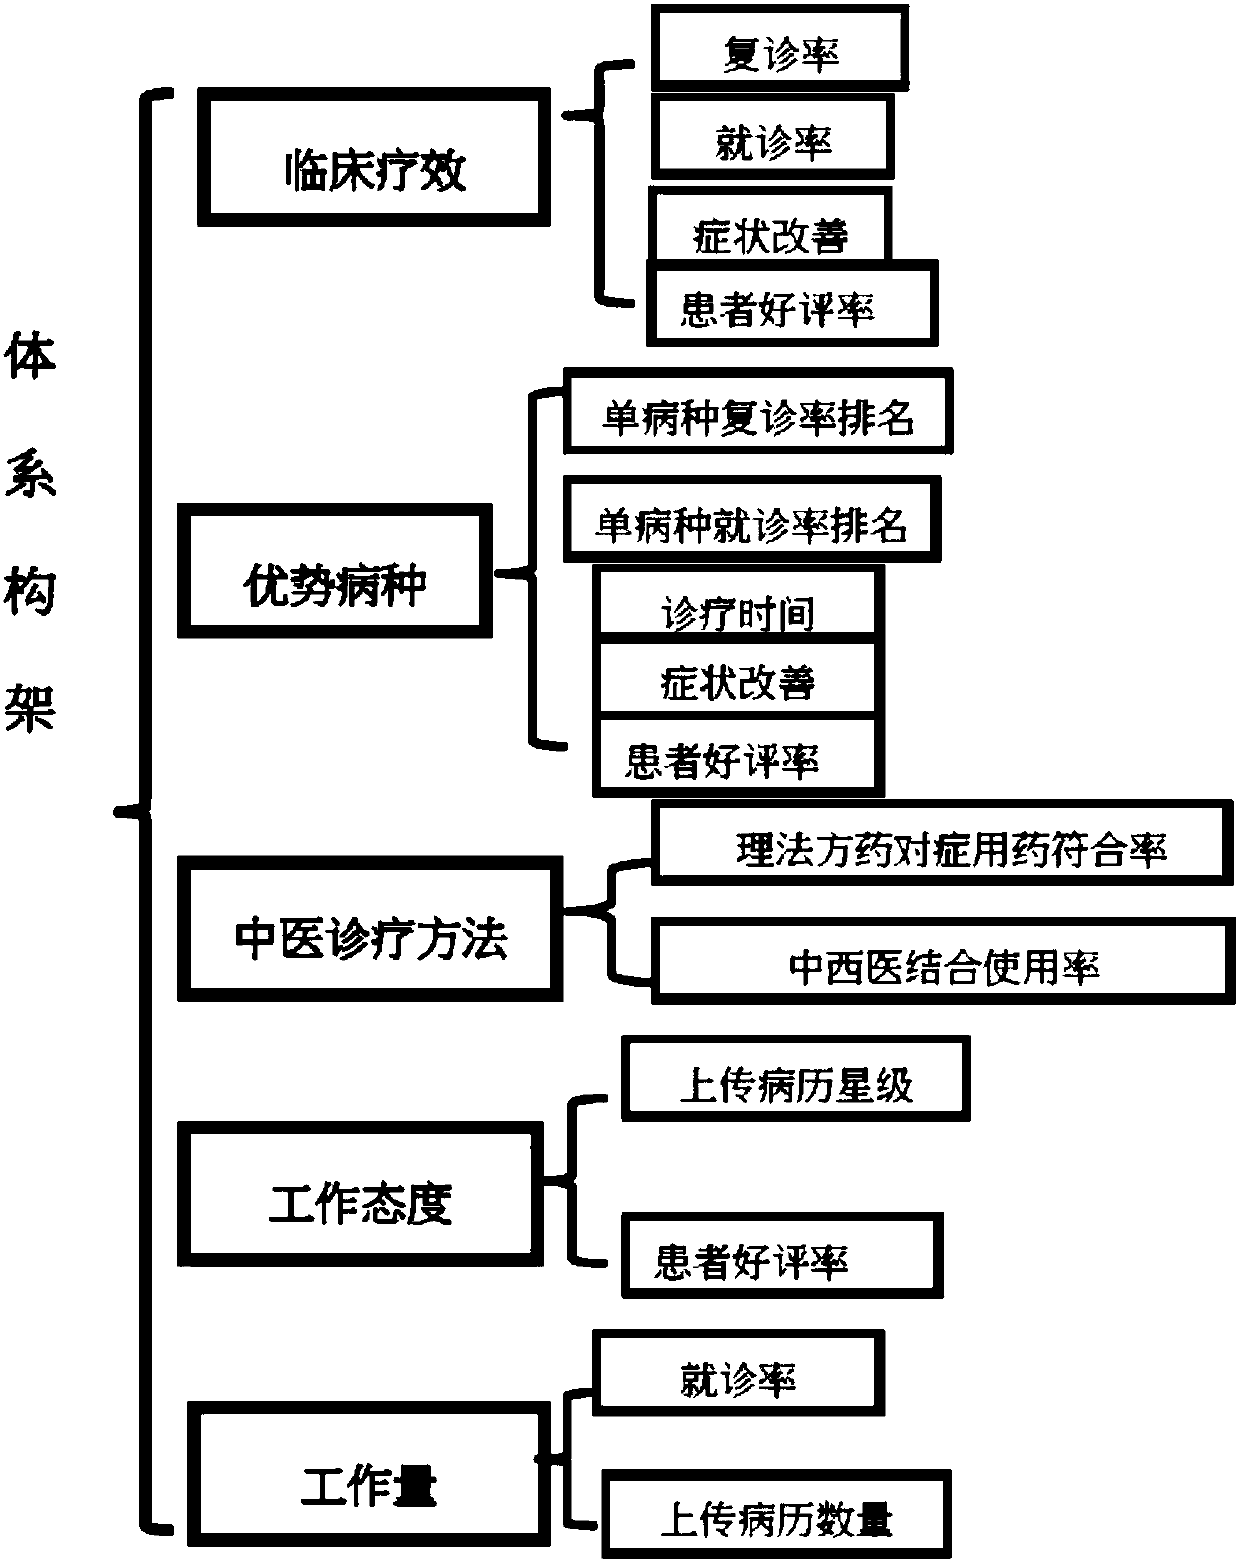 Clinical digital evaluation system of traditional Chinese medicine and its evaluation method based on big data analysis